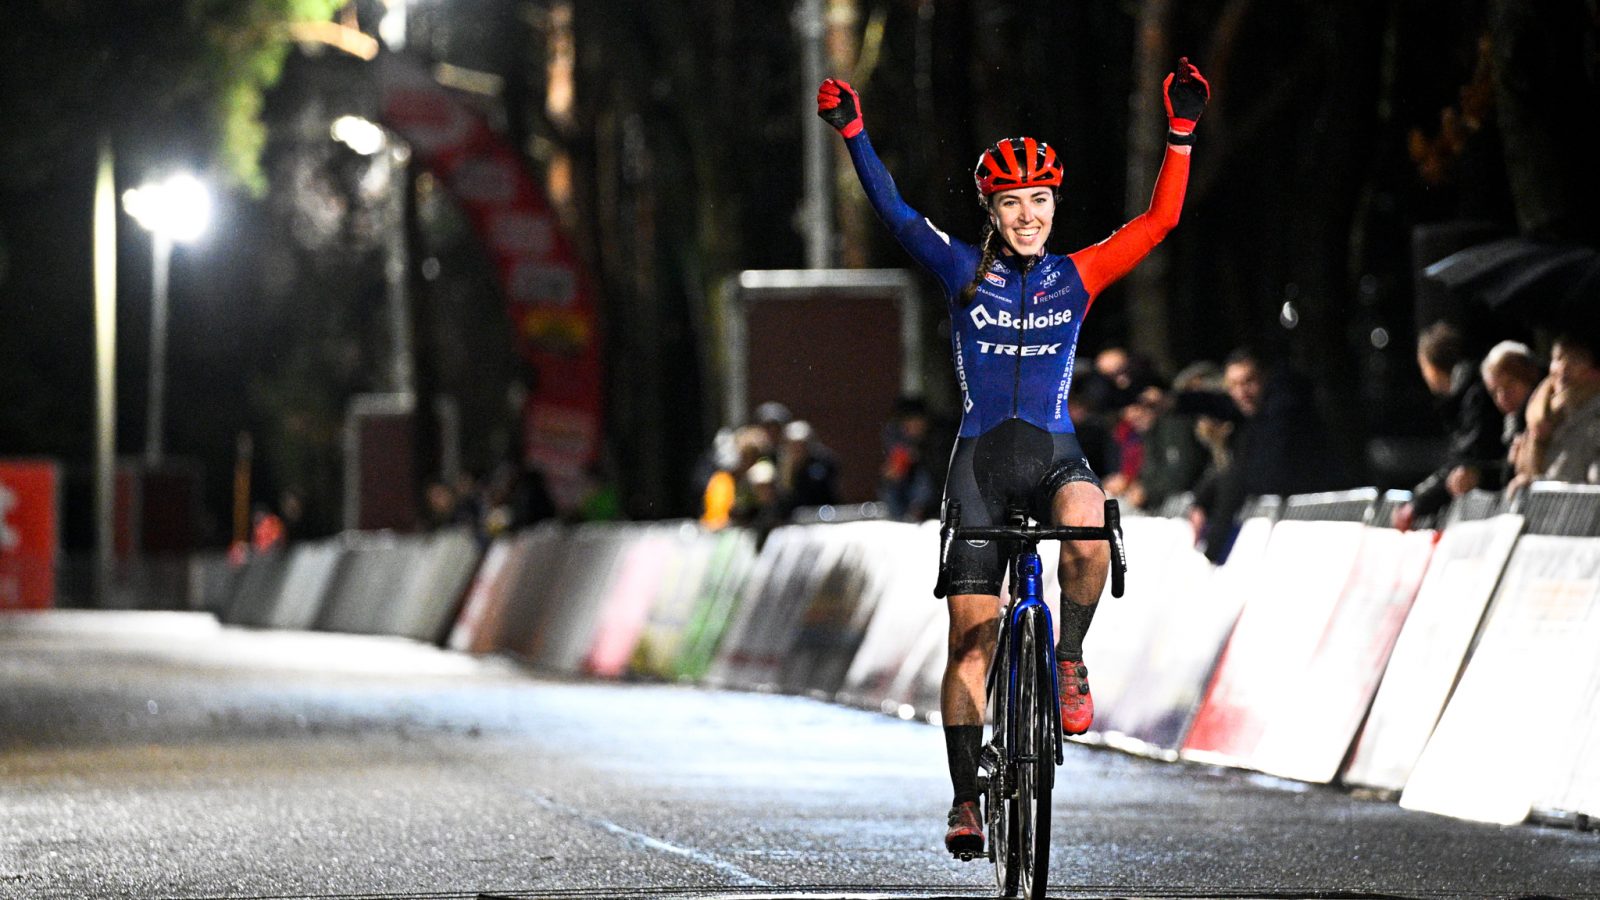 Dutch Shirin van Anrooij celebrates as she crosses the finish line to win the women's elite race of the 'Zilvermeer Mol' cyclocross cycling event, race 5/8 in the 'Exact Cross' competition, Friday 23 December 2022 in Mol.
BELGA PHOTO JASPER JACOBS